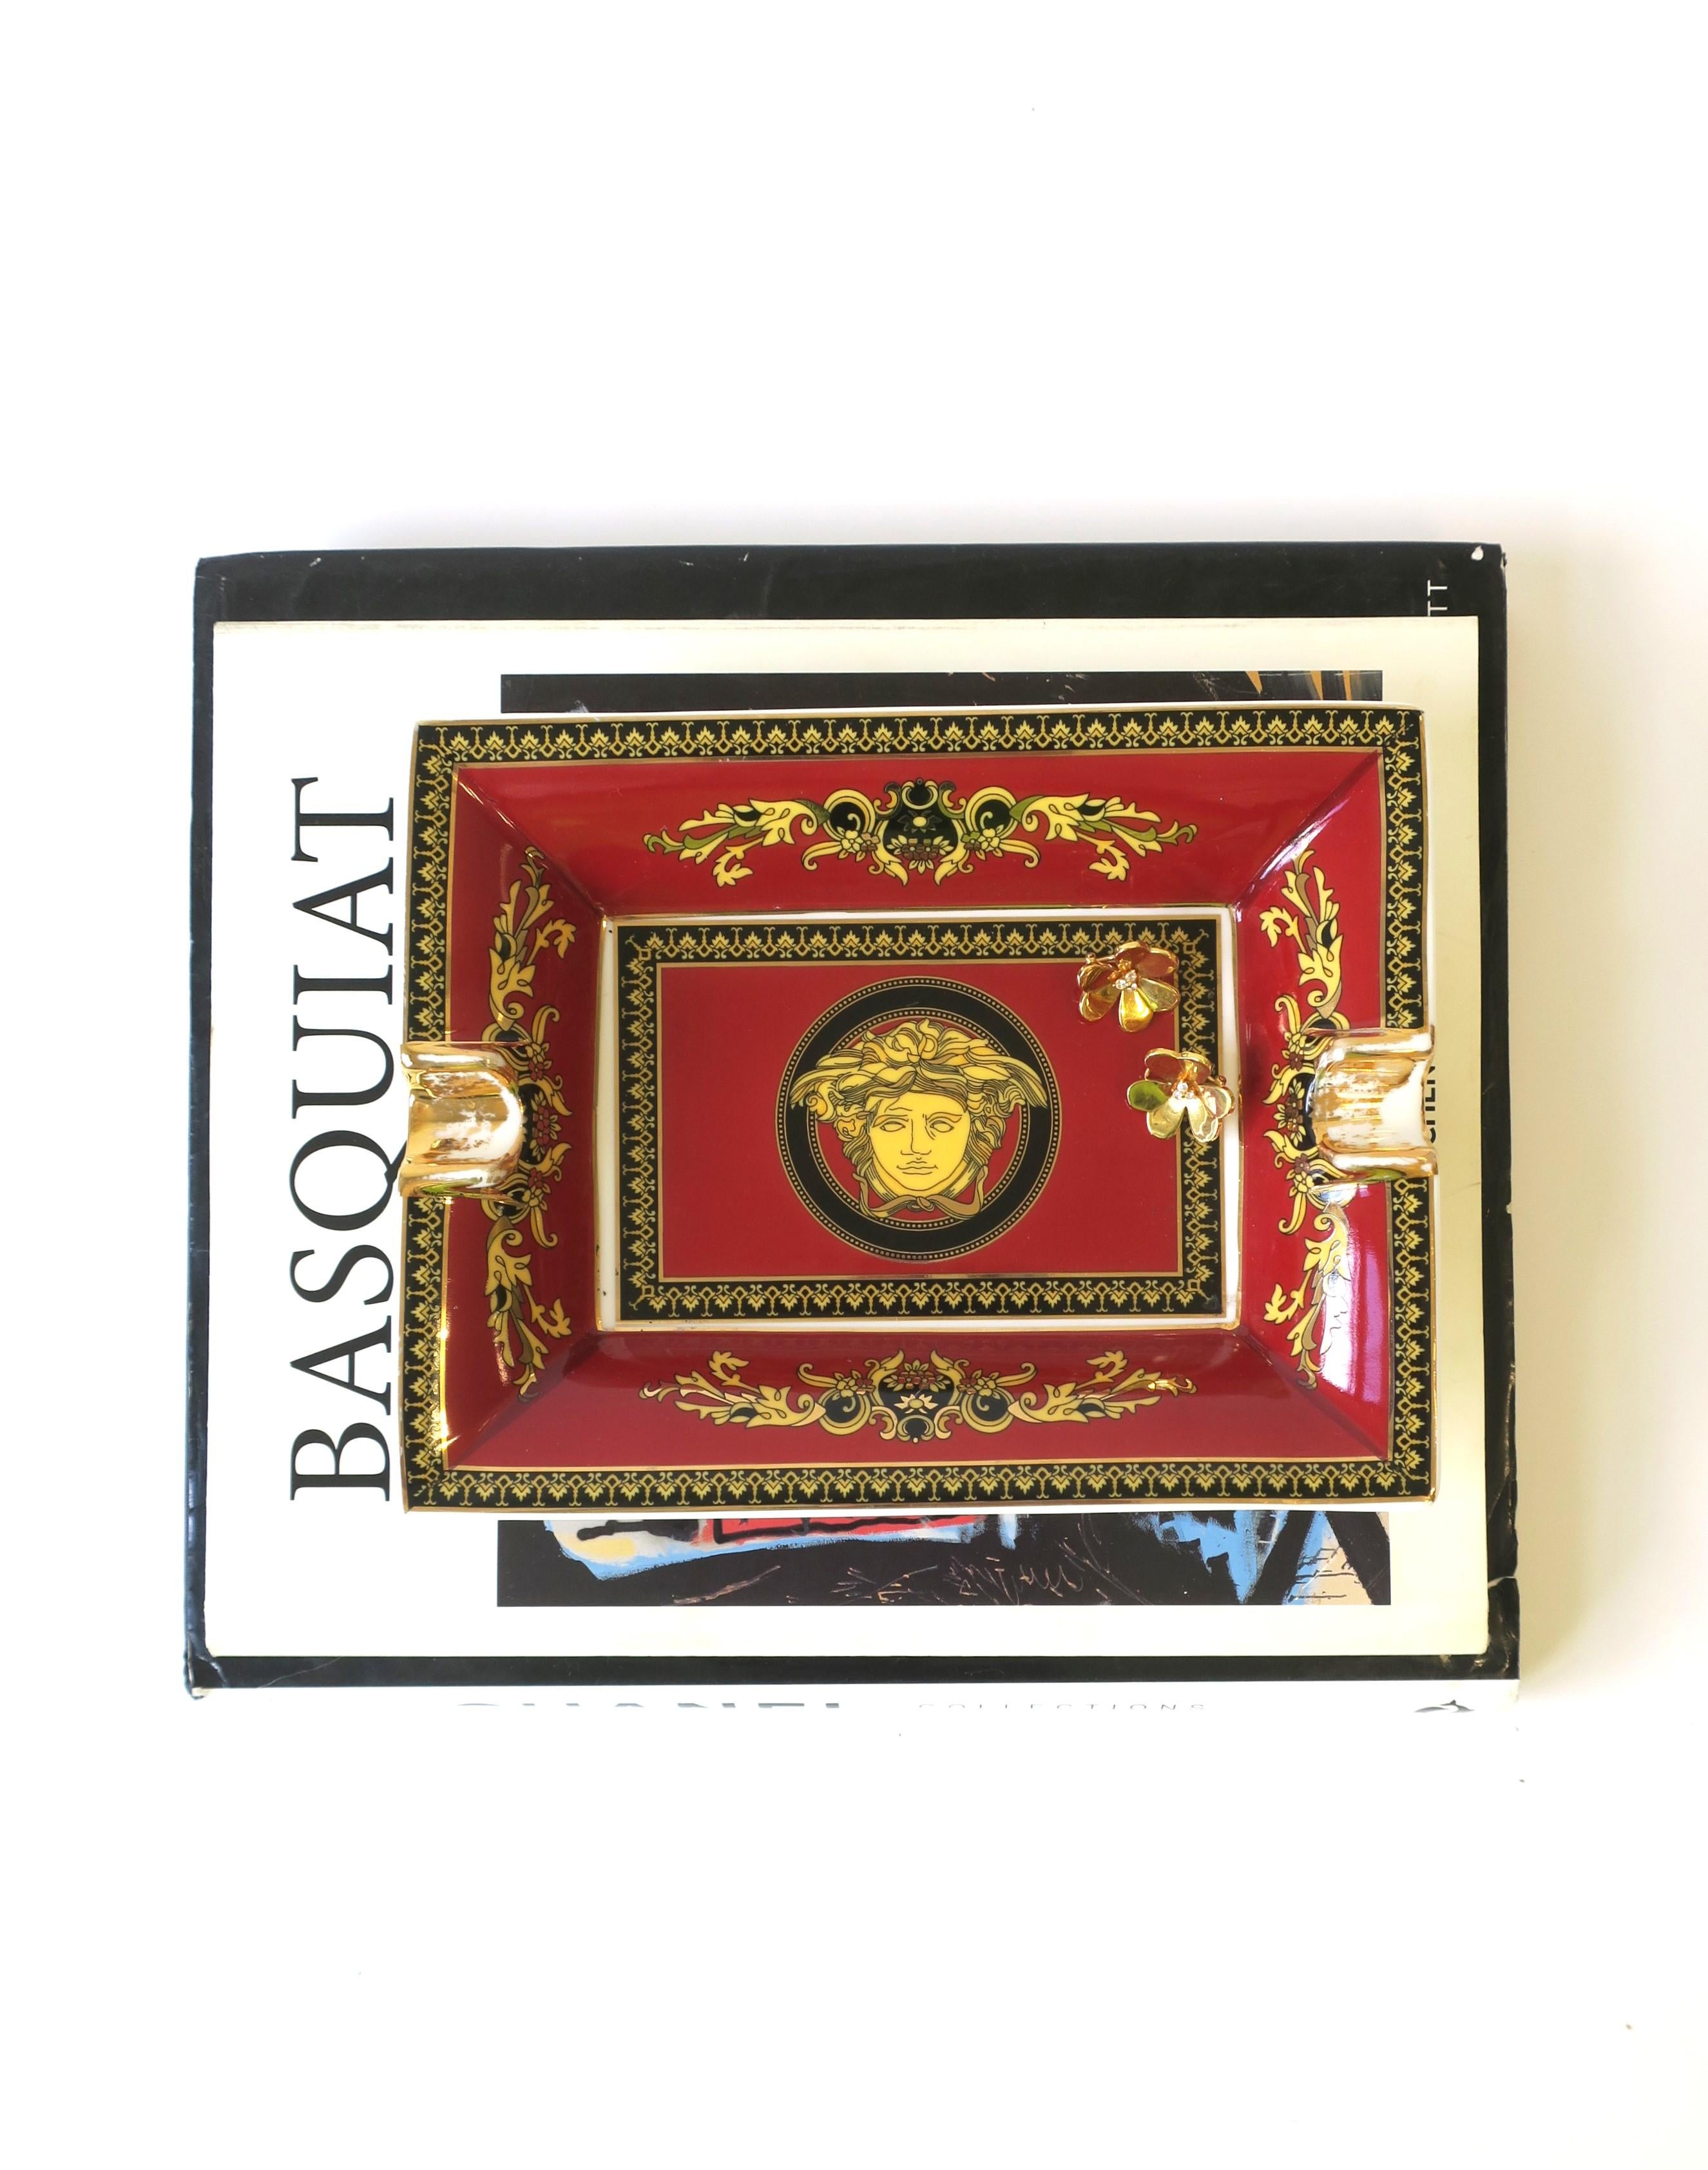 German Versace Medusa Porcelain Catchall Tray Dish or Ashtray in Red Burgundy & Gold